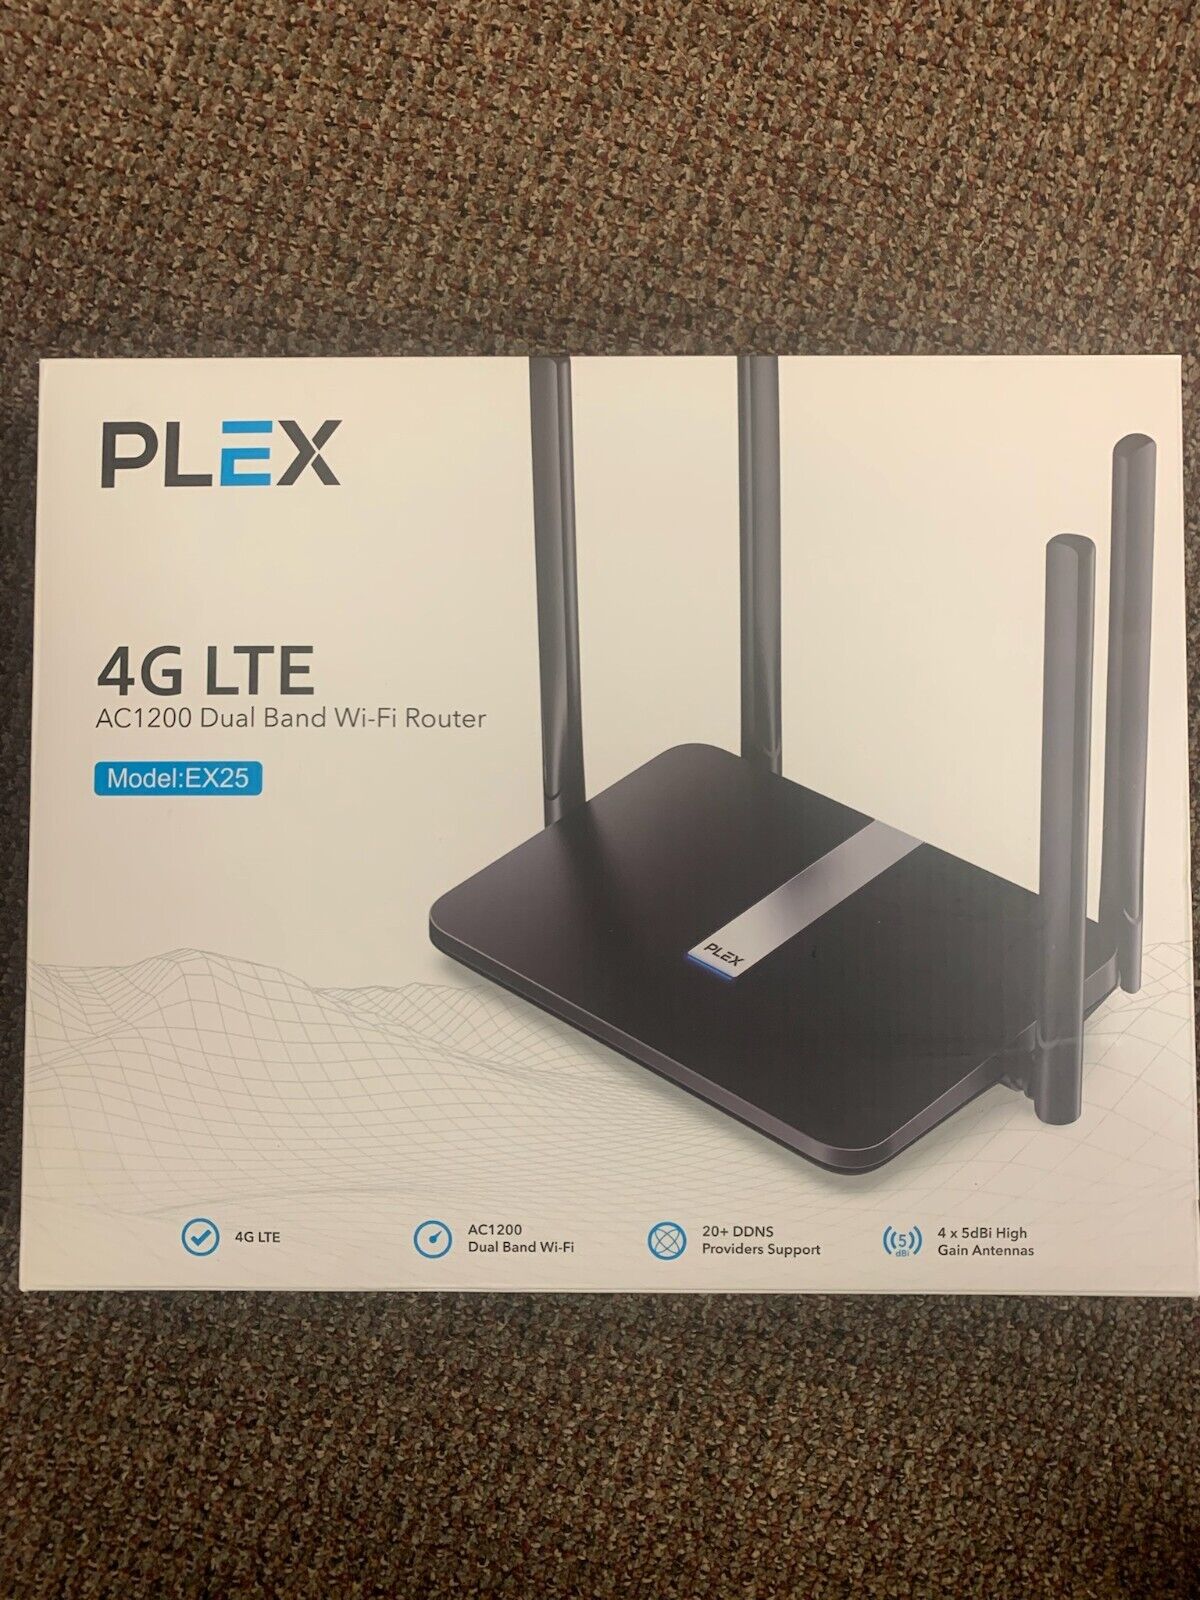 PLEX 4g LTE AC1200 Dual Band Wi-Fi Router - AT&T Unlimited Data for Rural Areas